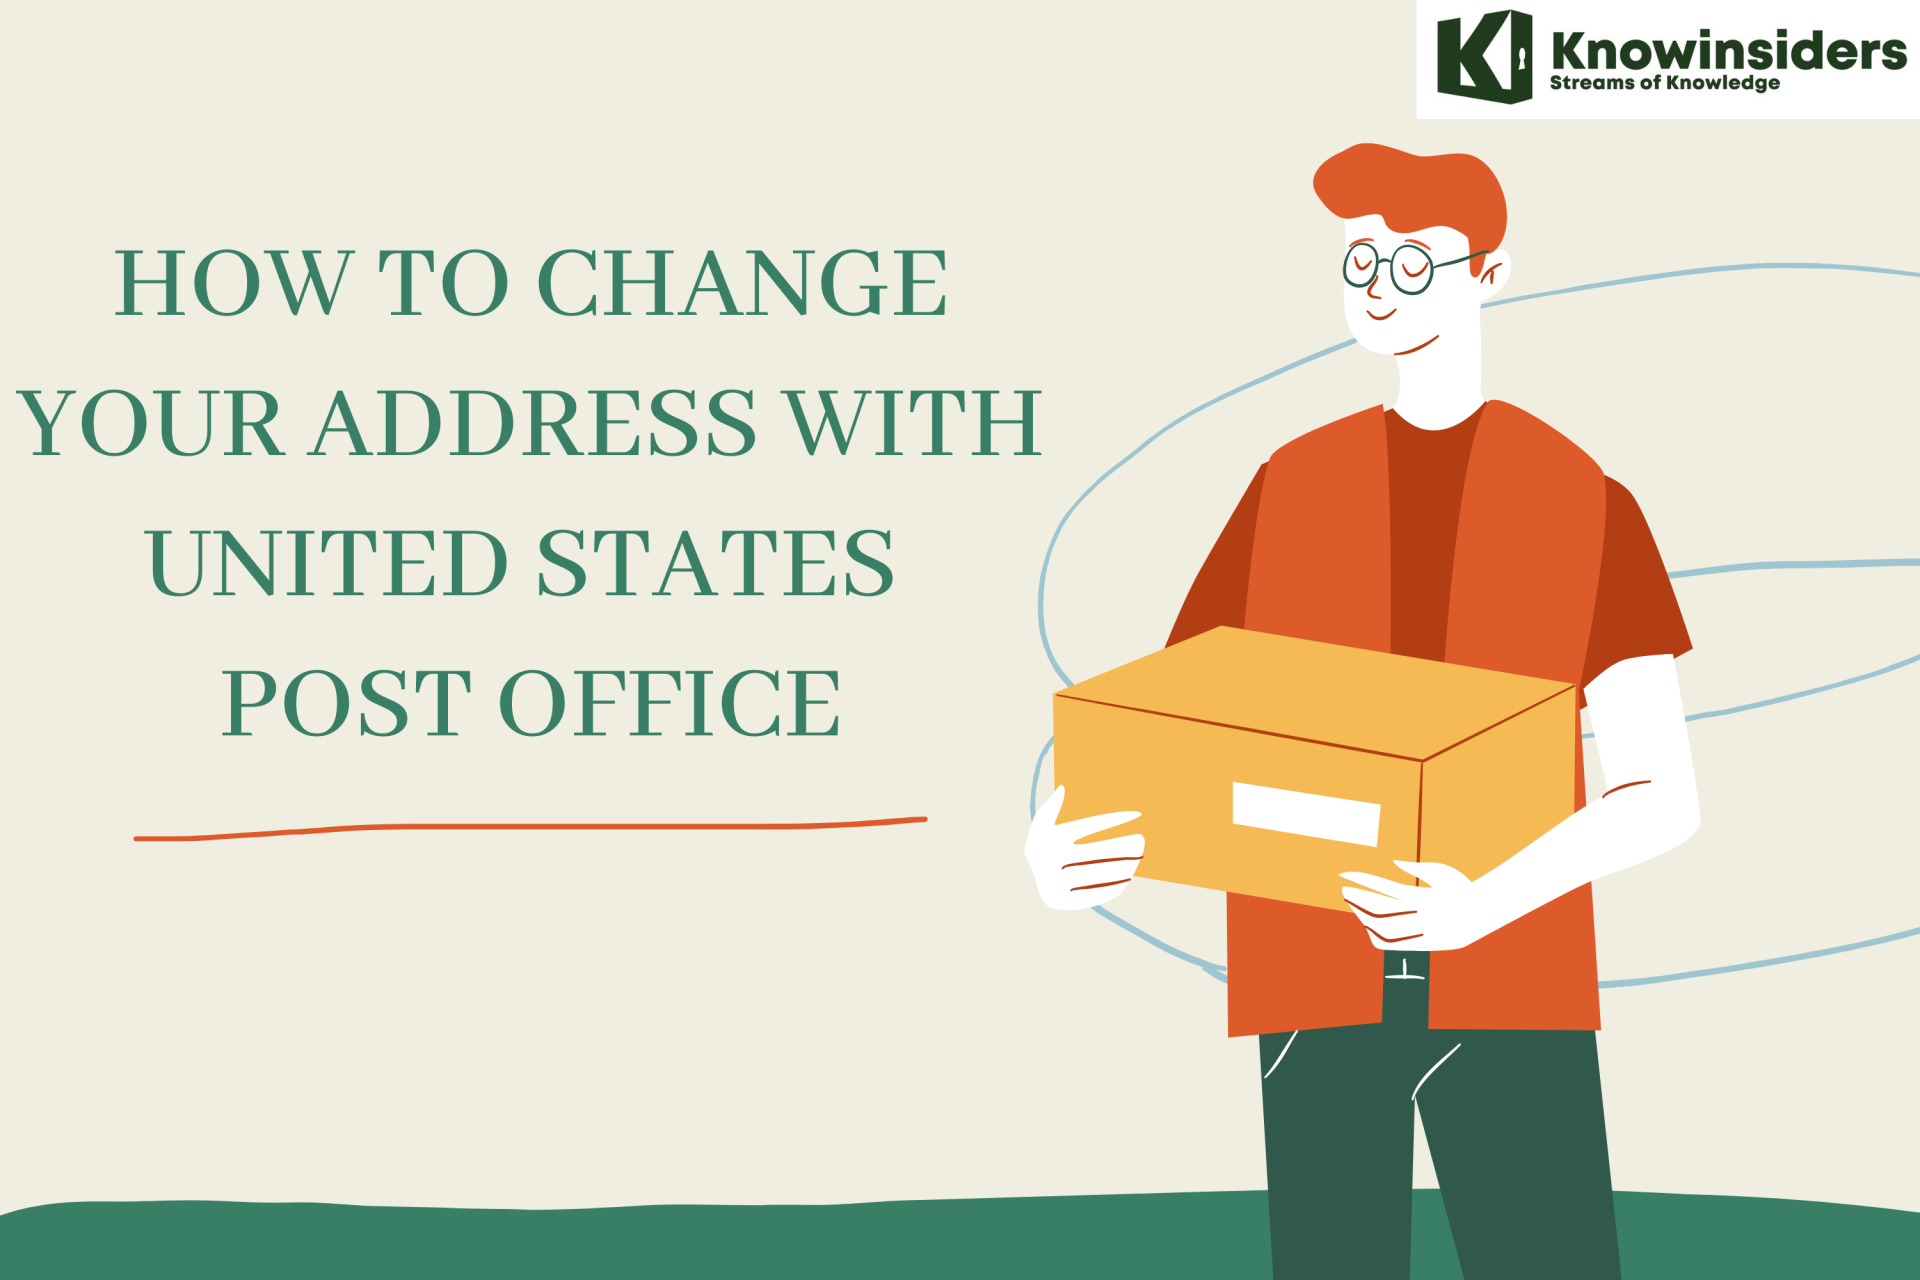 How To Change Your Address With United States Post Office